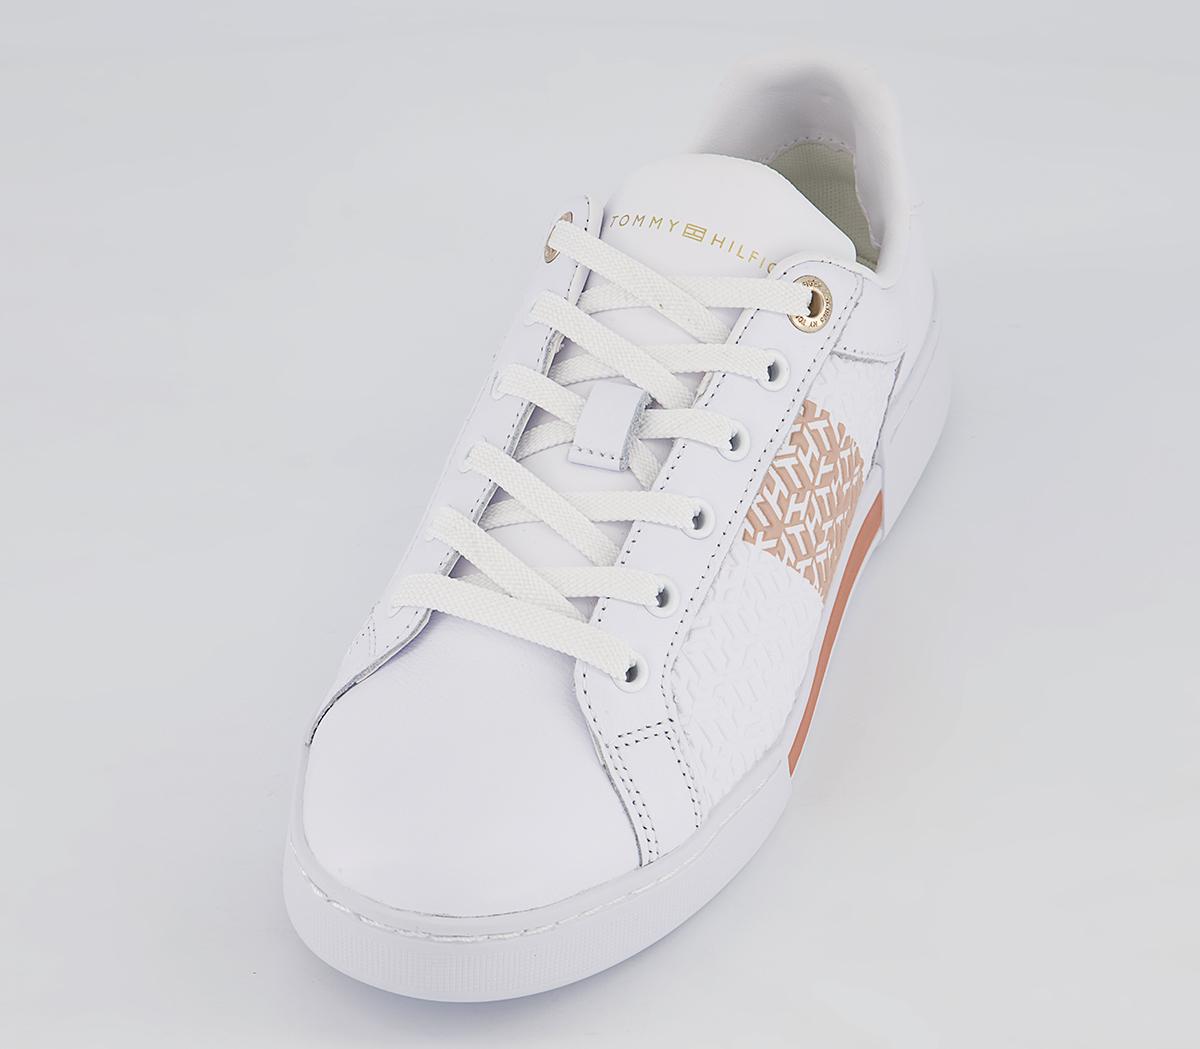 Tommy Hilfiger Monogram Sneakers White Metallic Gold - Women's Trainers